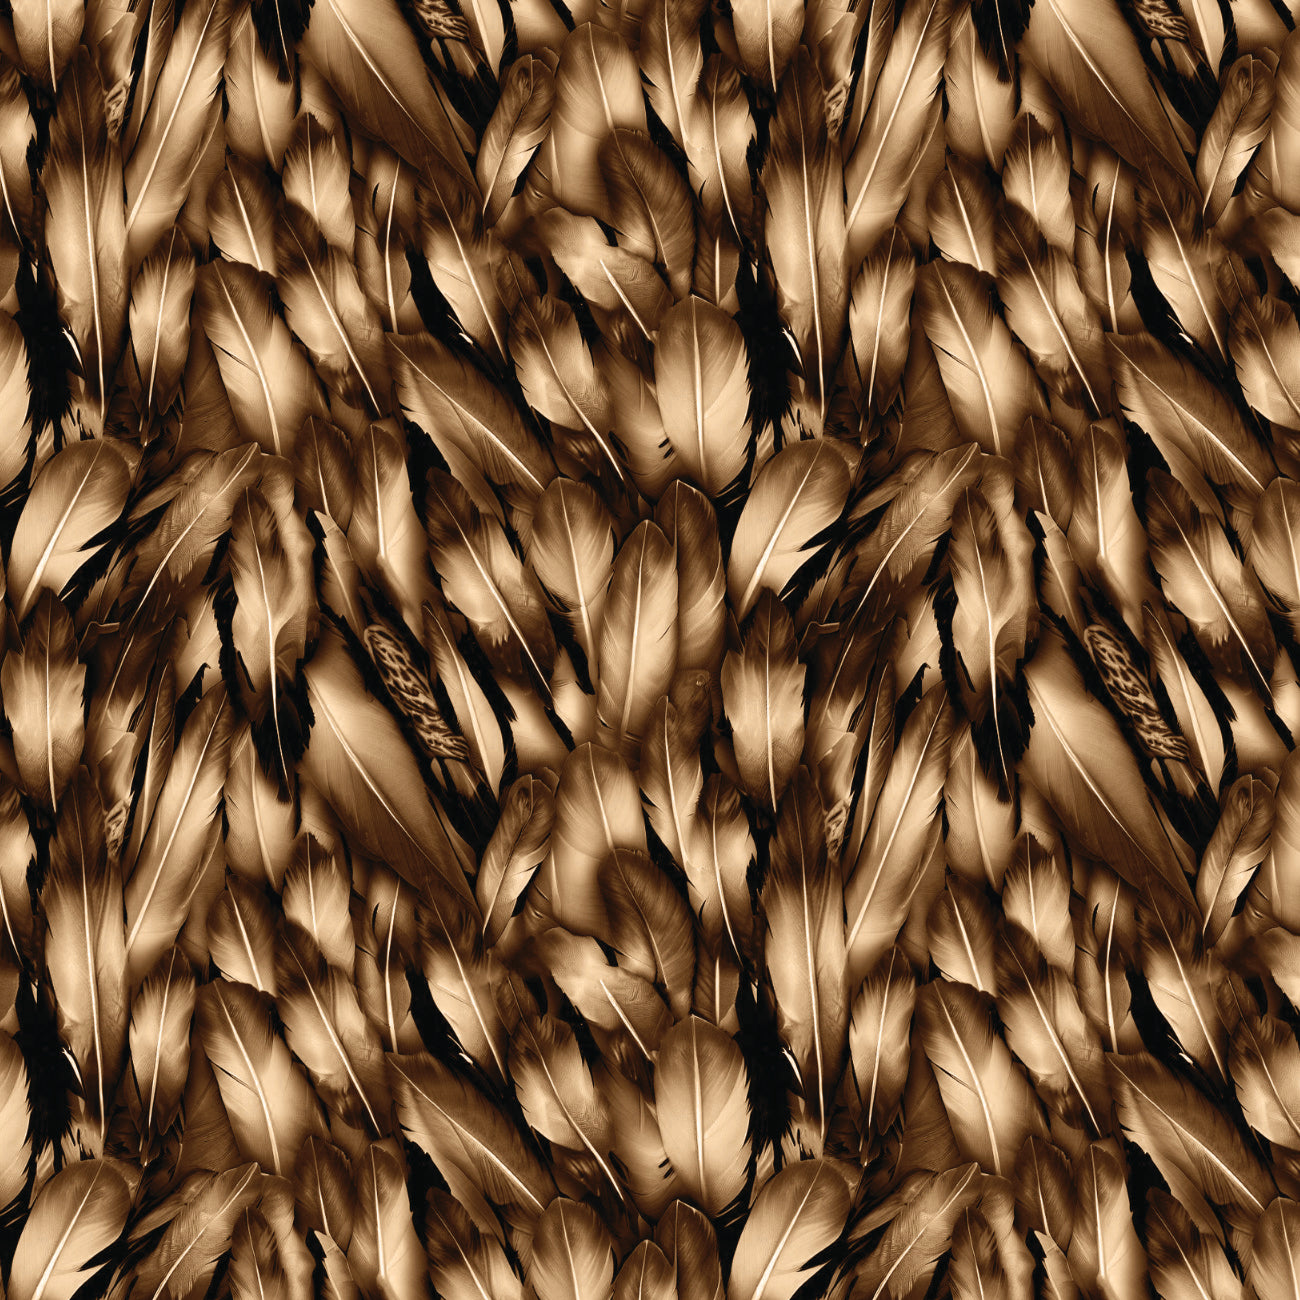 Strokes of the Wild Collection-Feathers-Brown-100% Cotton 21231201-02